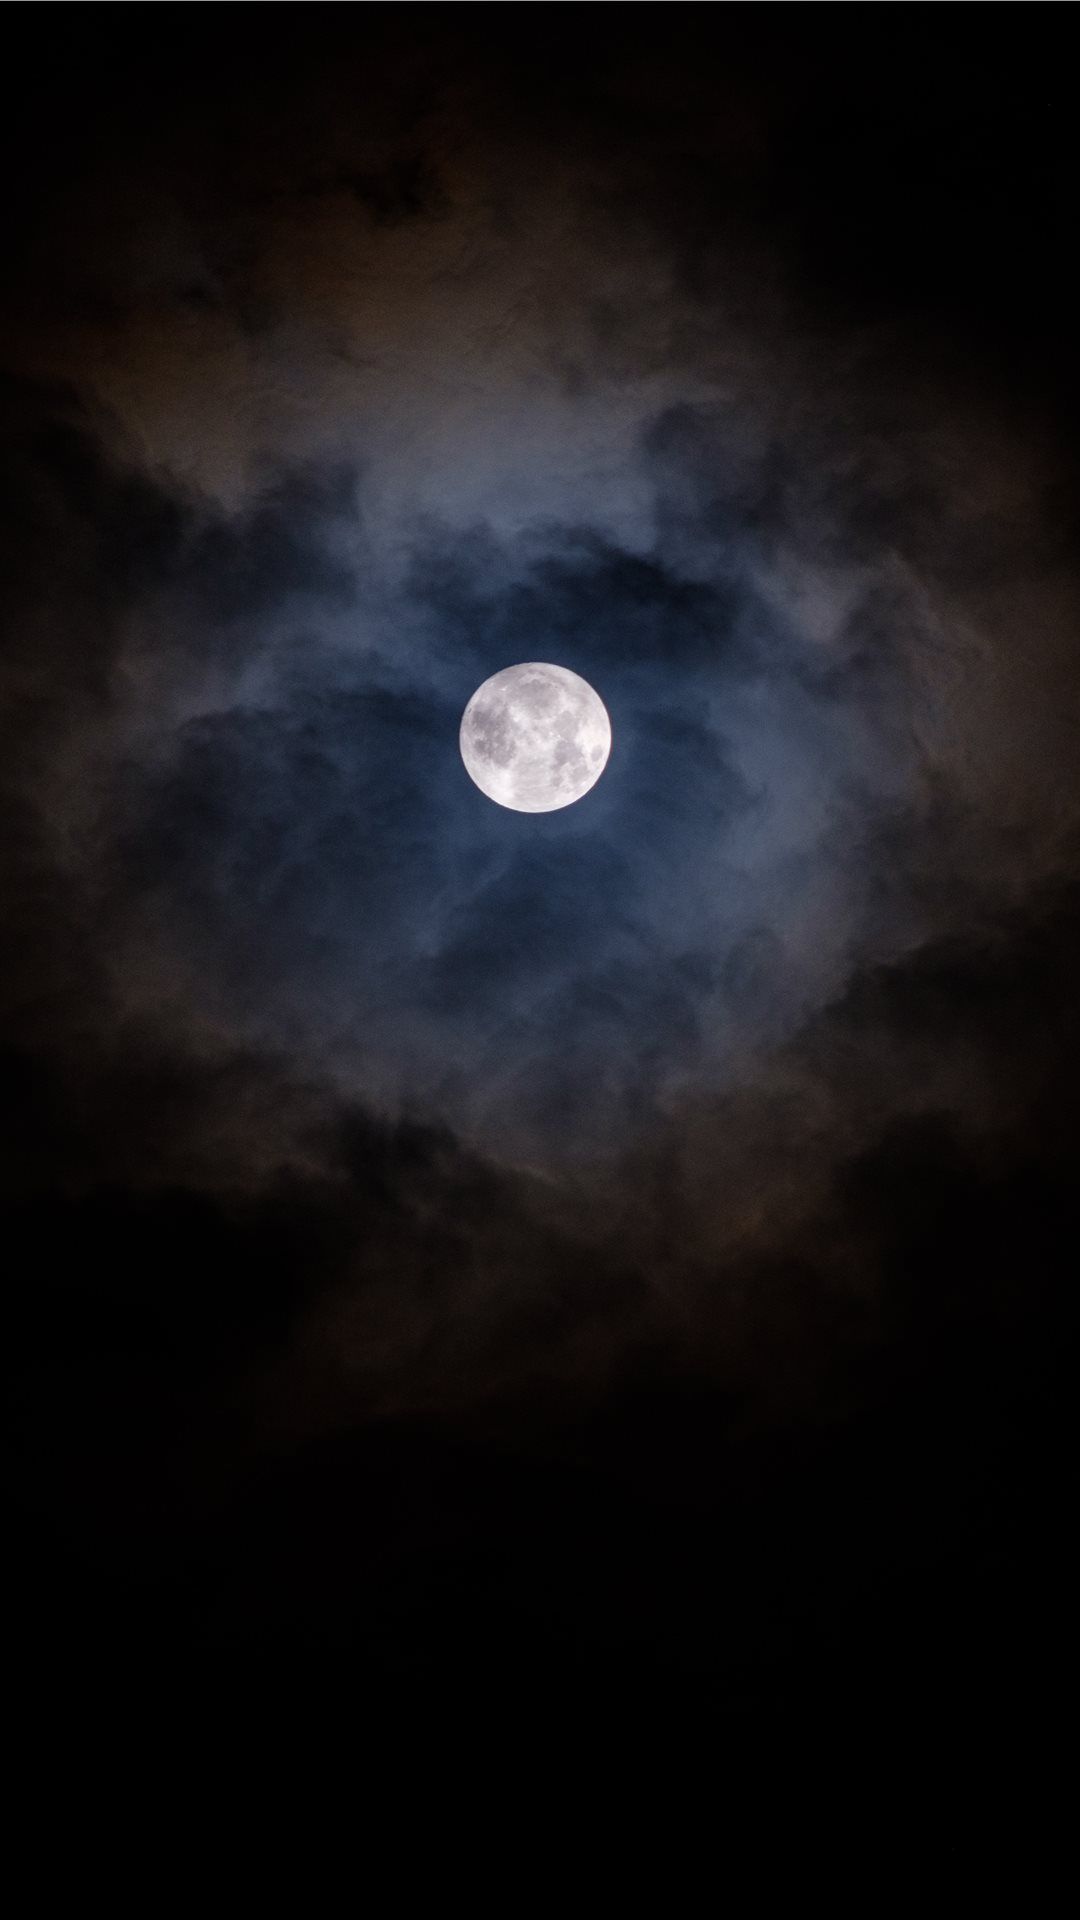 The full moon in the sky, partially obscured by clouds. - Moon